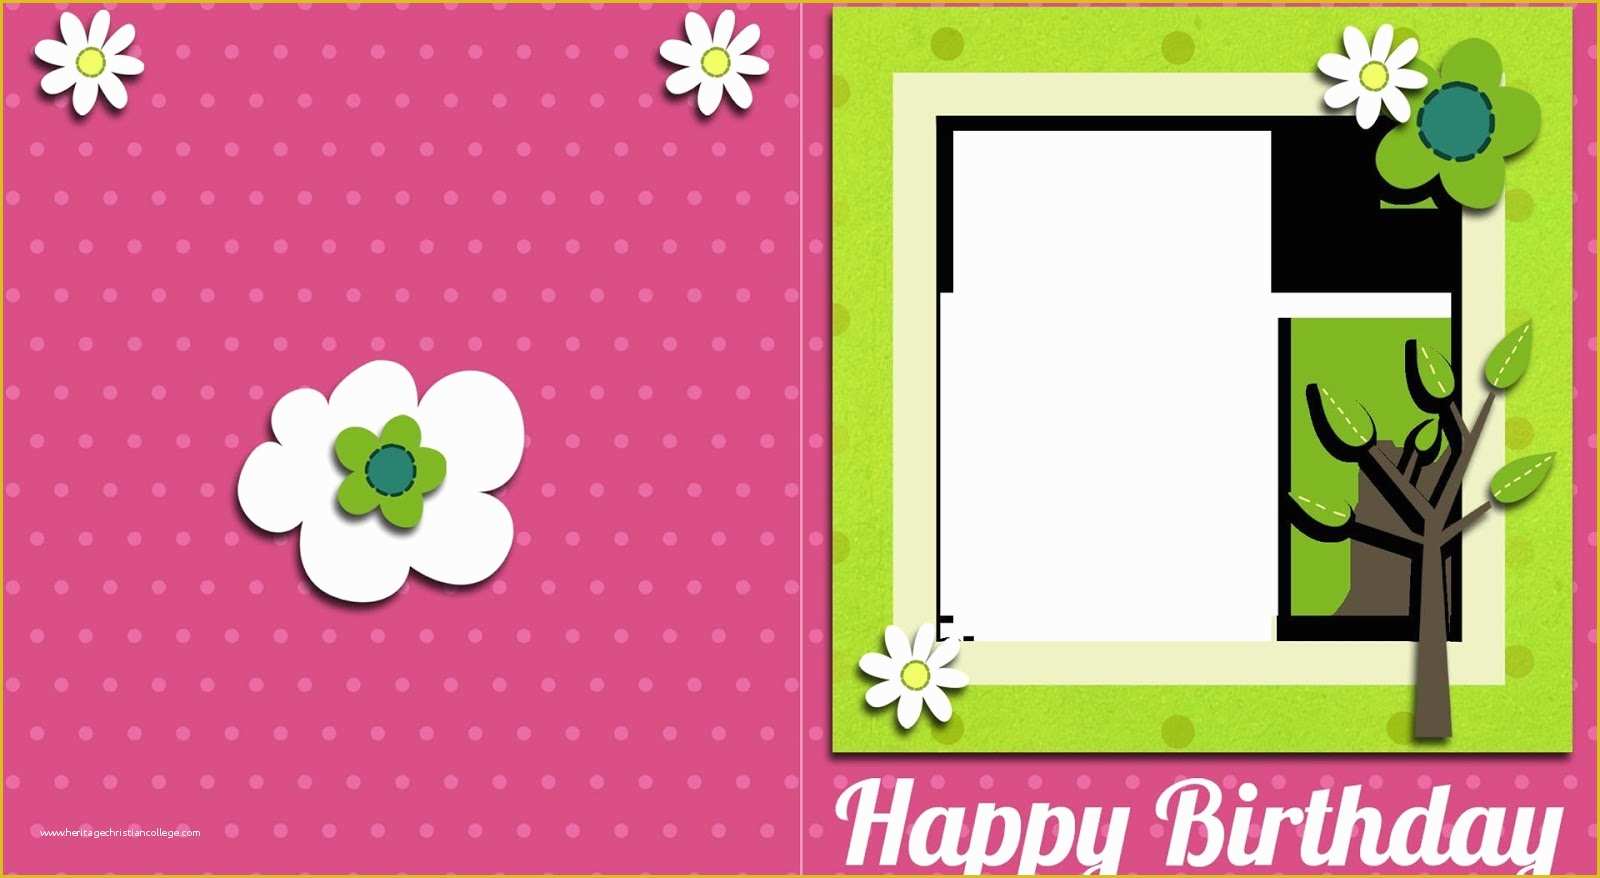 Birthday Wishes Templates Free Download Of Wish You A Very Happy Birthday Words Texted Wishes Card Images